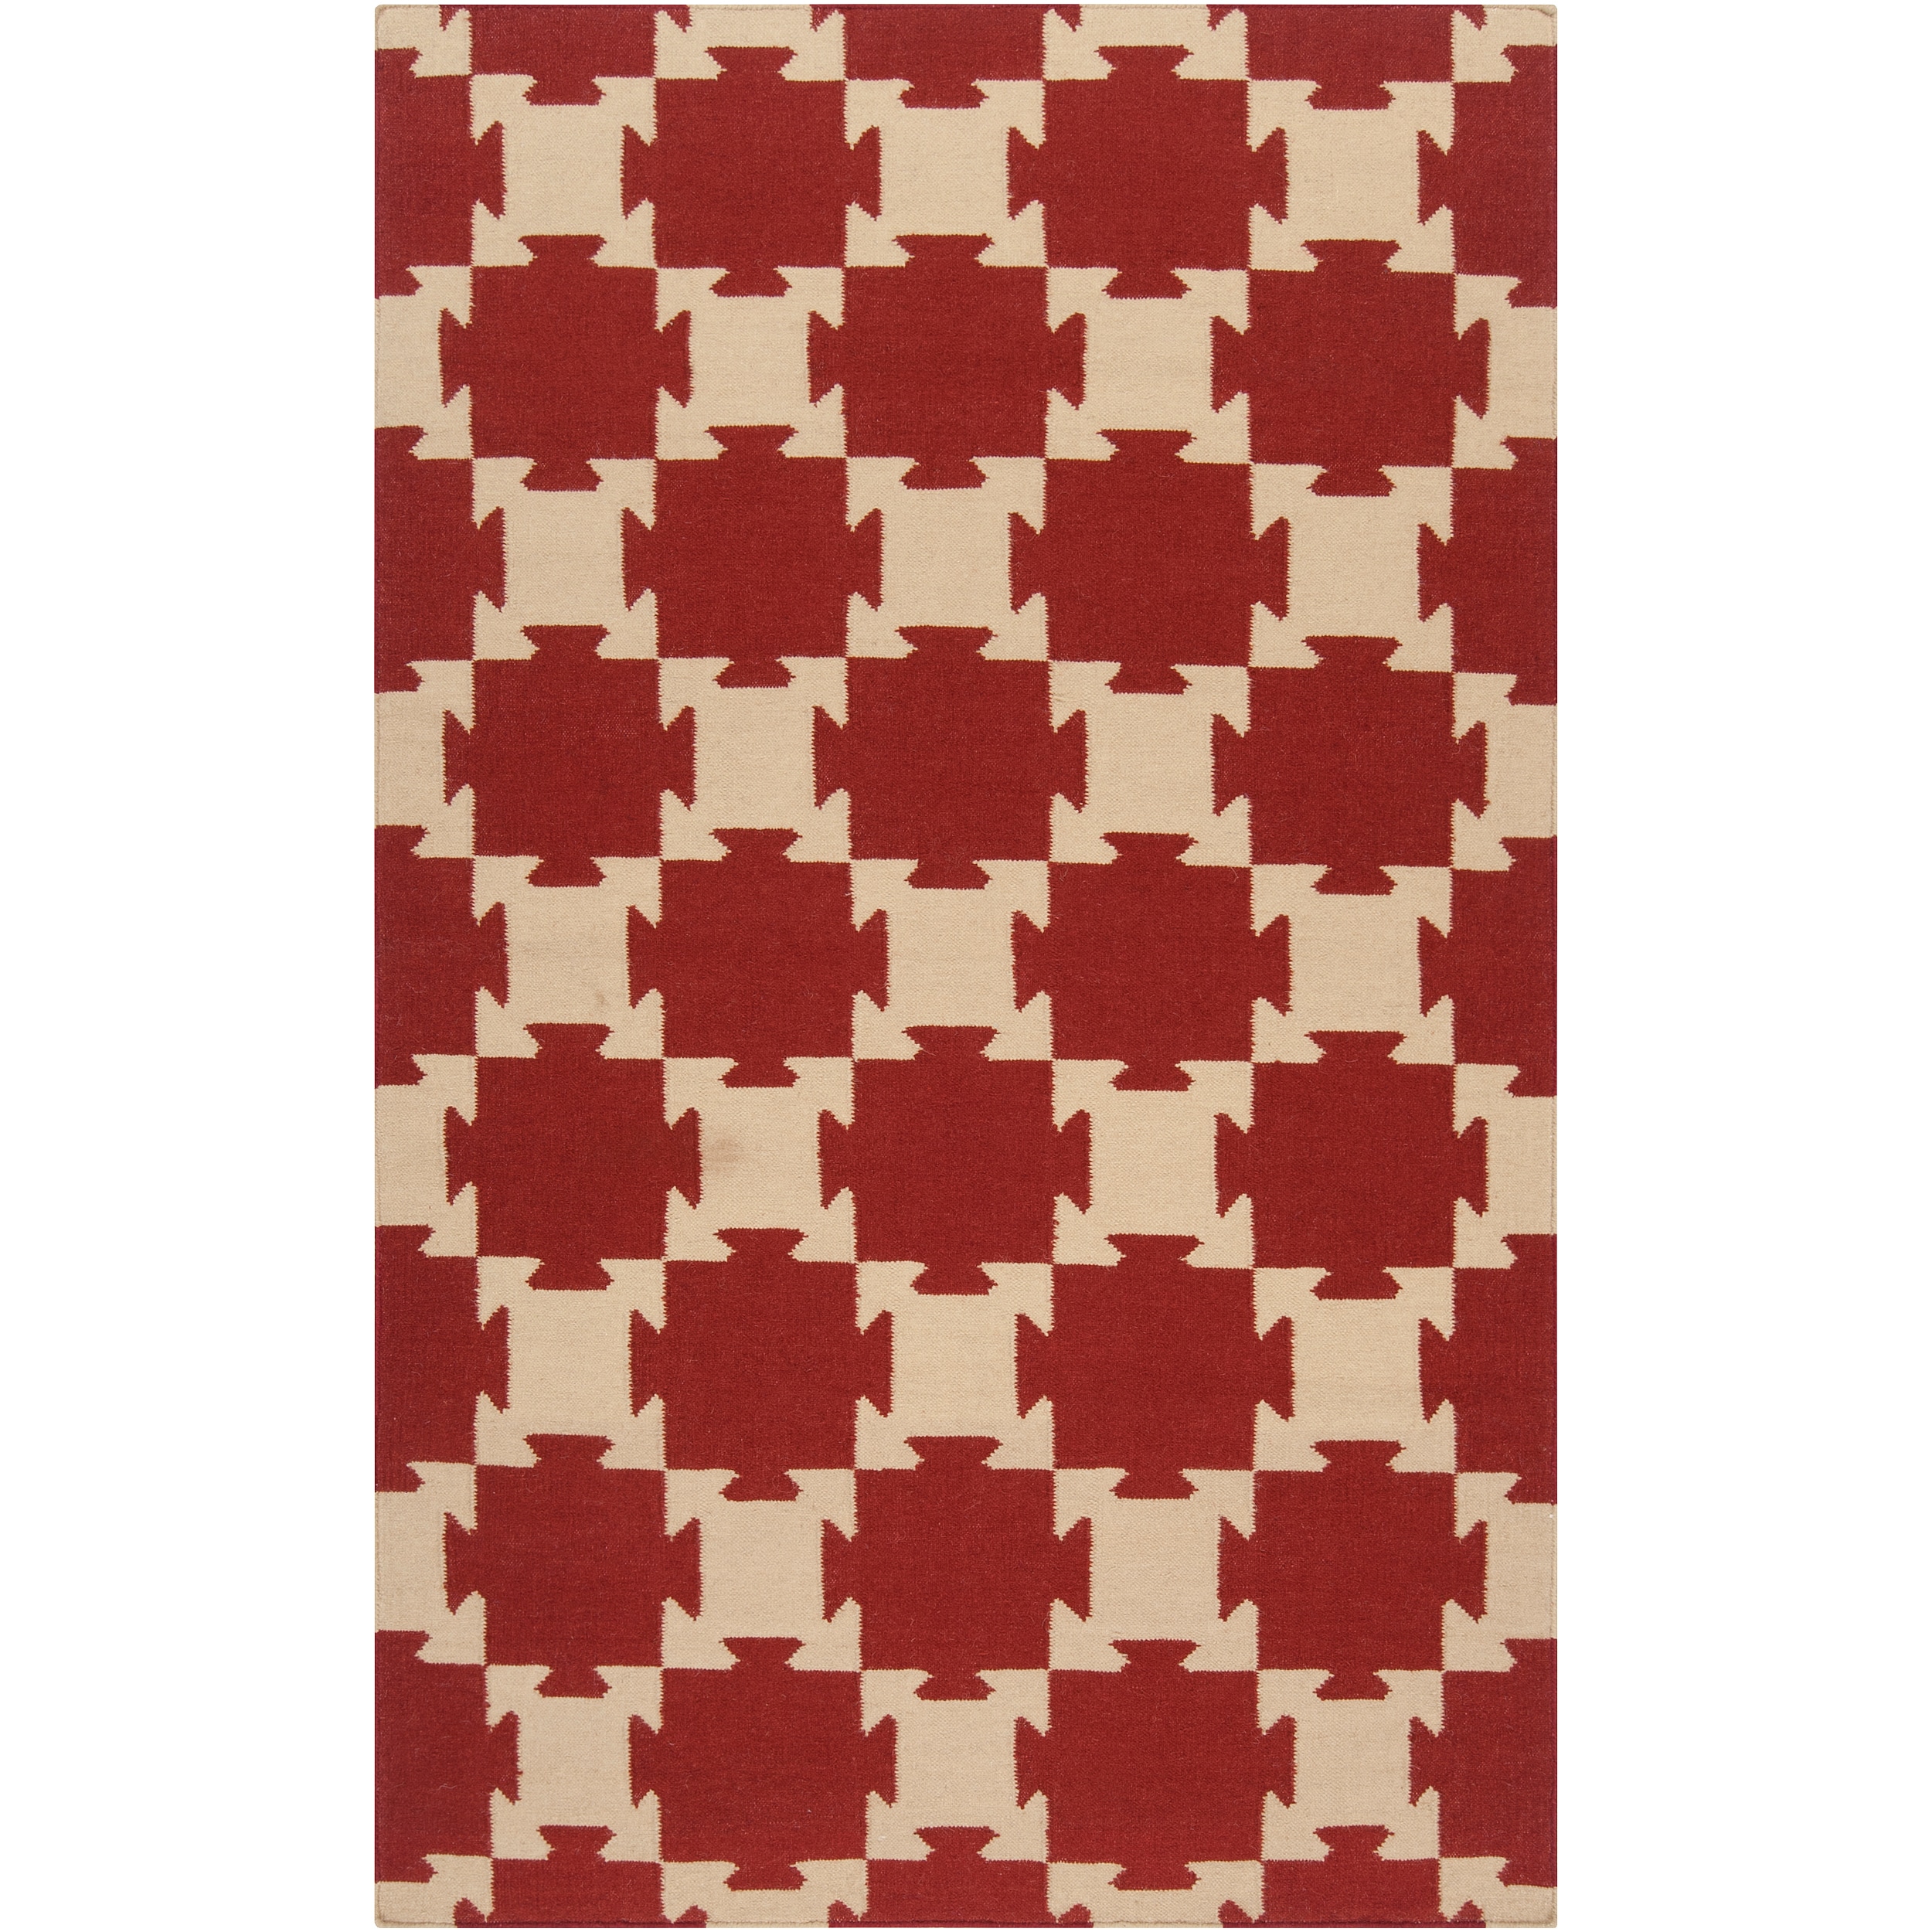 Smithsonian Hand woven Red Anchor Wool Rug (36 X 56)